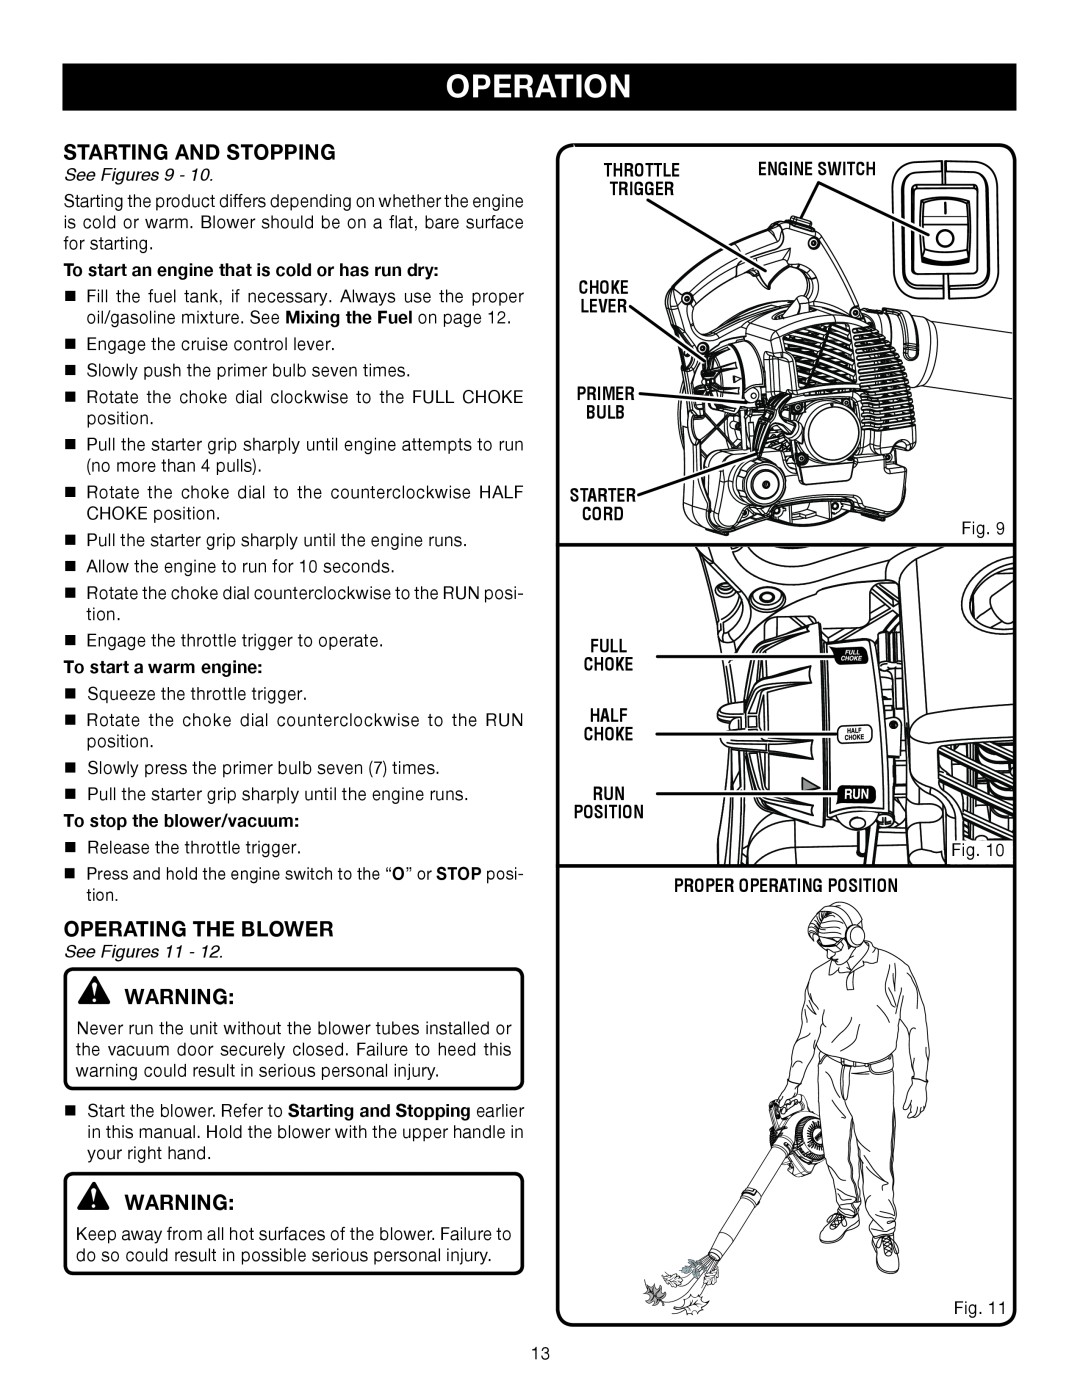 Ryobi RY08552 Starting And Stopping, Operating The Blower, Operation, To start a warm engine, See Figures 11, starter 